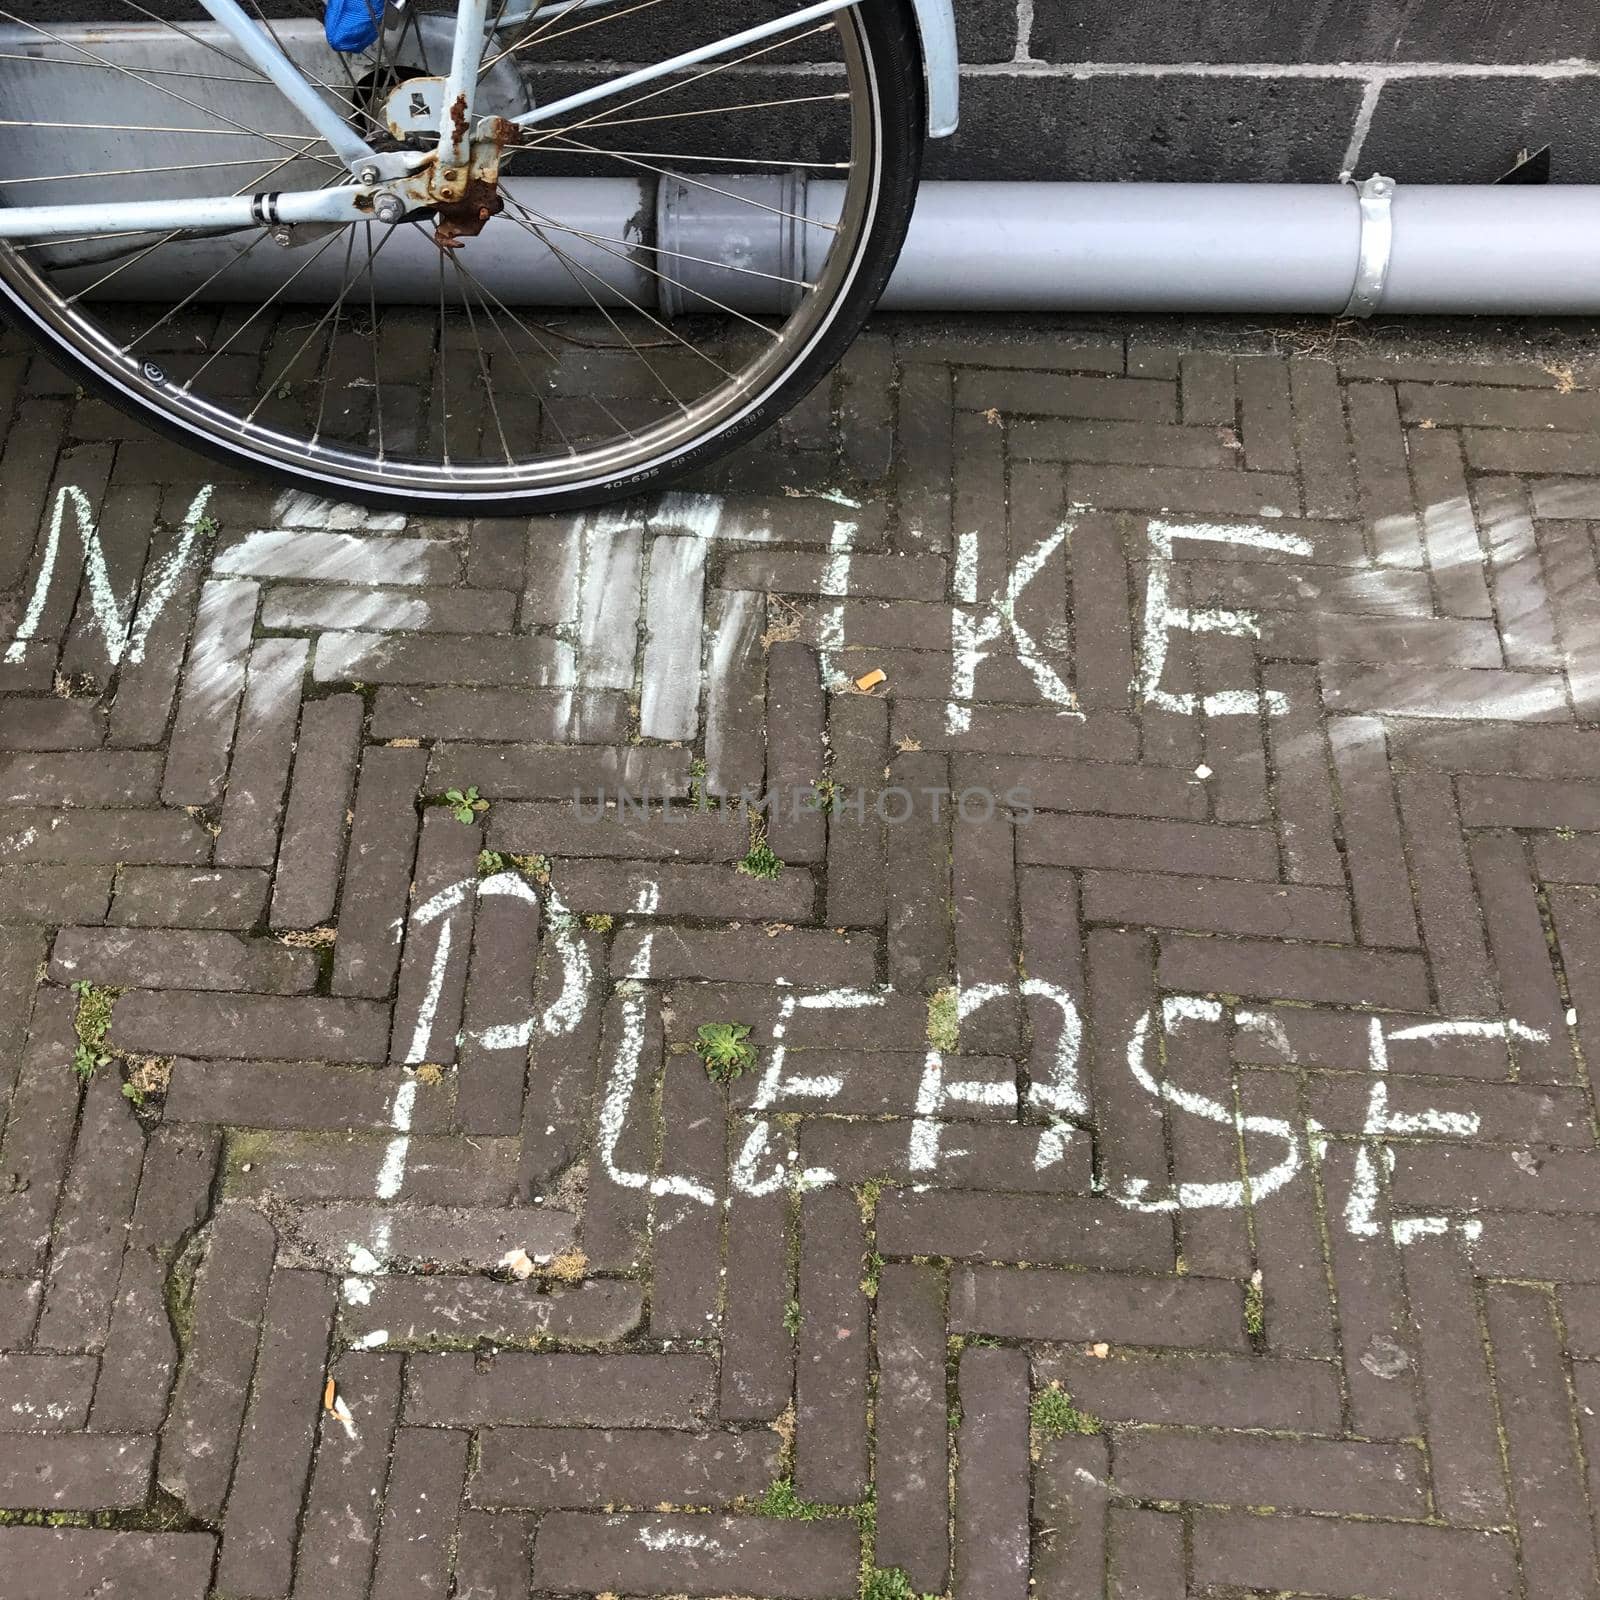 Pavement of small bricks with chalk letters reading ‘No bikes please’ and a parked bike showing disobedience